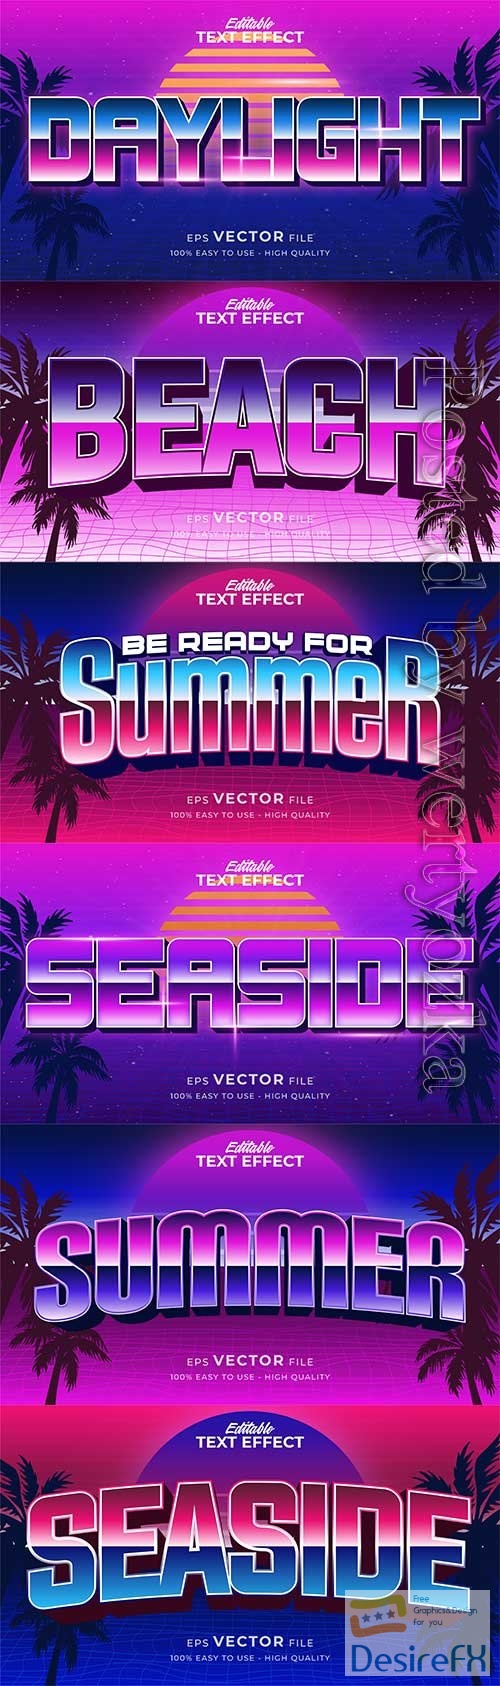 Retro summer holiday text in grunge style theme in vector vol 14